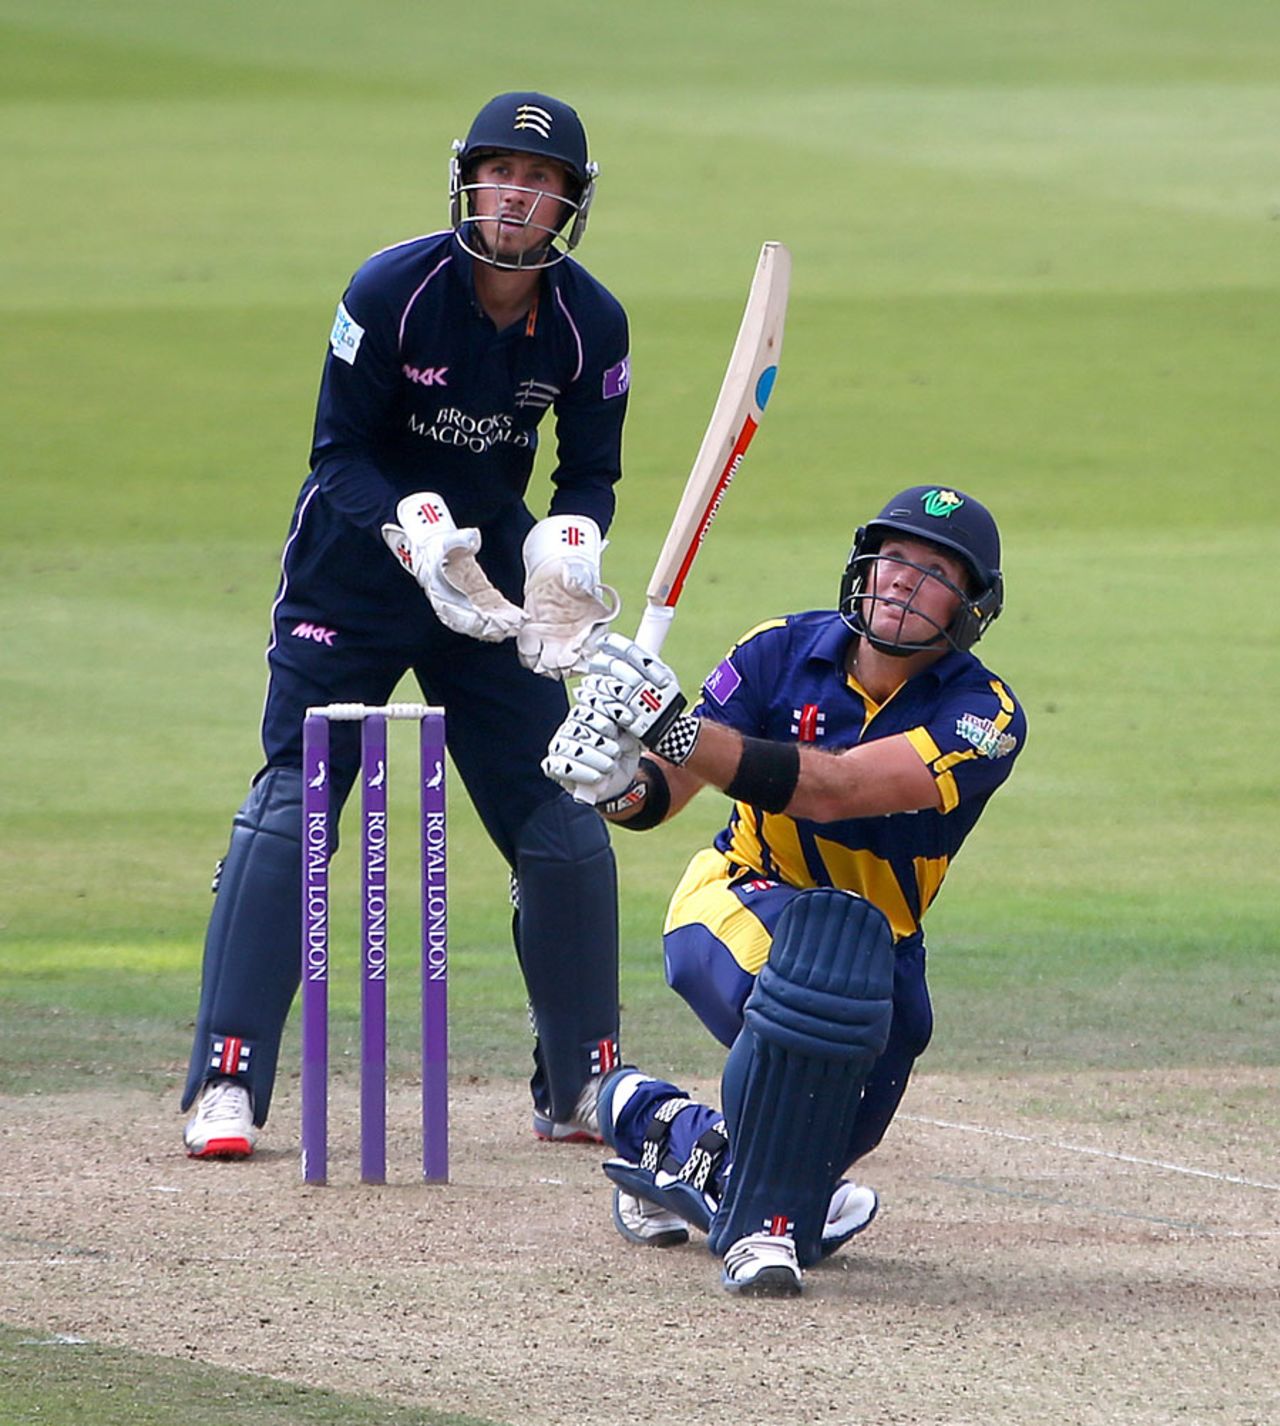 Colin Ingram anchored Glamorgan with 102, Middlesex v Glamorgan, Royal London Cup, Group B, Lord's, August 17, 2015